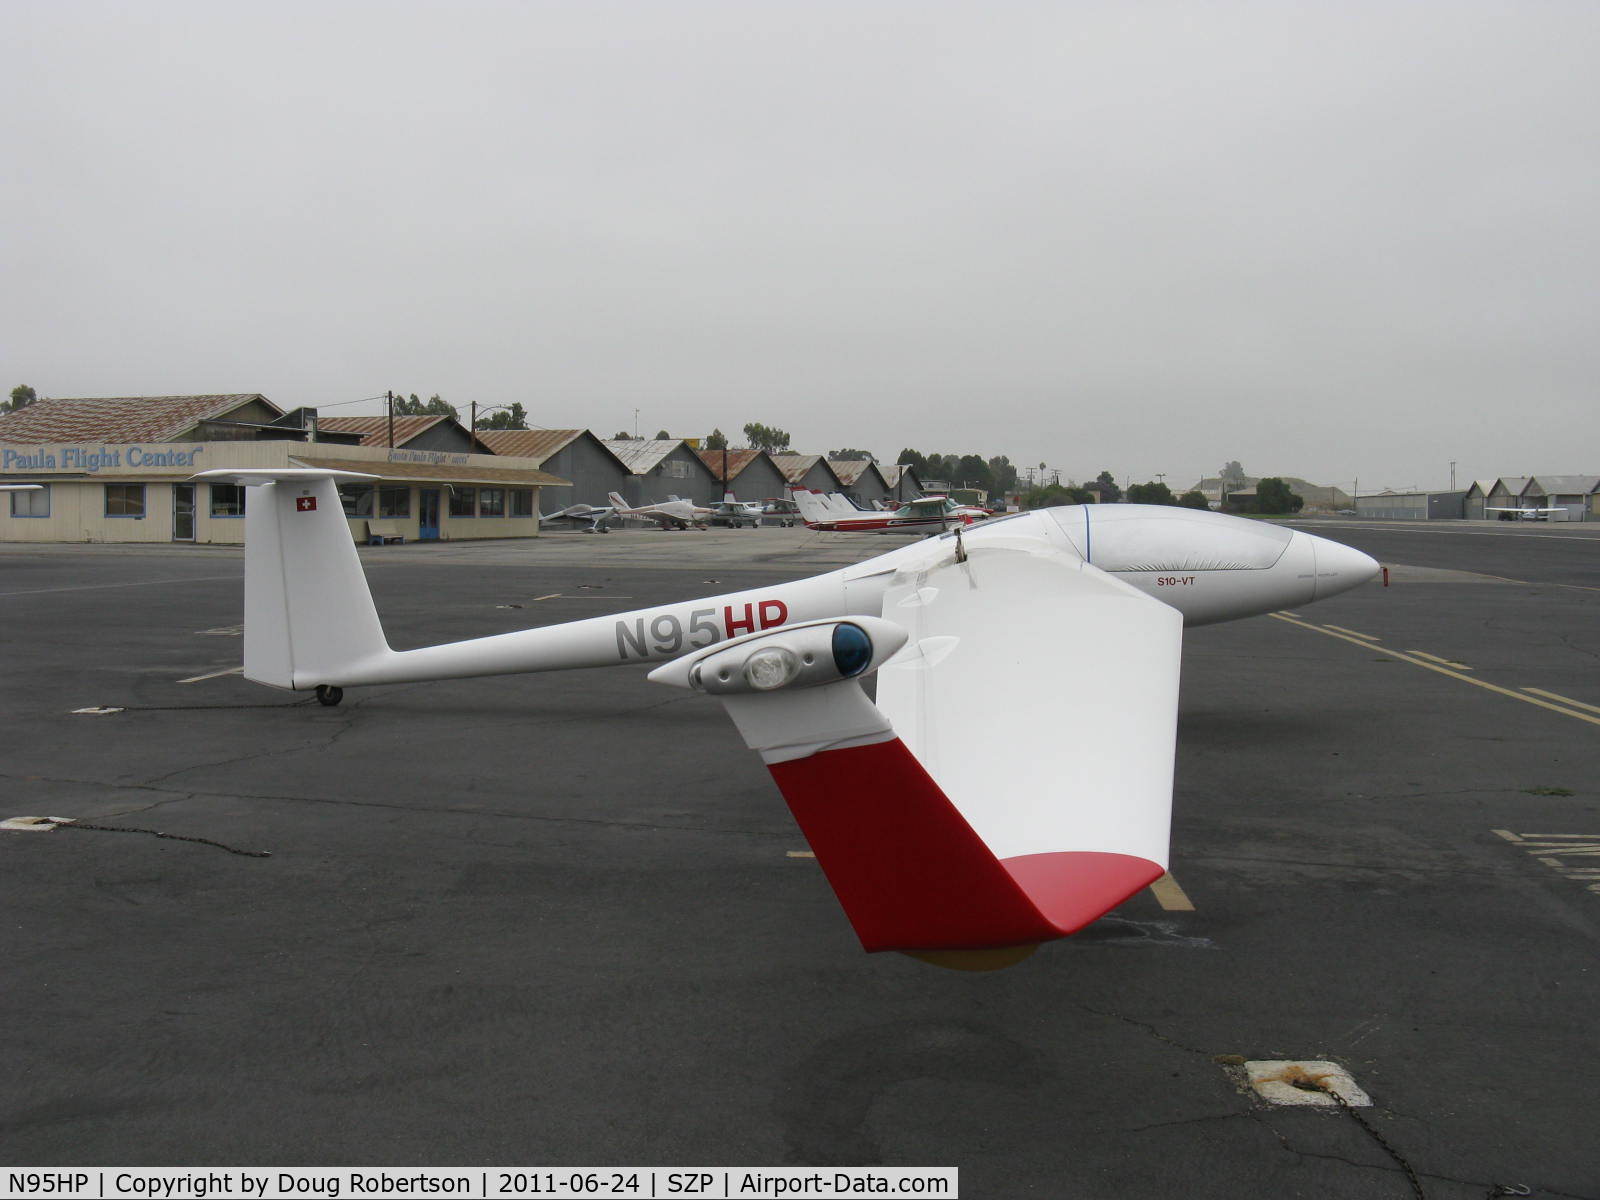 N95HP, 2000 Stemme S-10VT C/N 11-041, 2000 Stemme Gmbh & Co. S10-VT self-launching sailplane, Rotax Supercharged 914 F2/S1 113.5 Hp, 28.3 aspect ratio wing with optional winglets with nav lighting